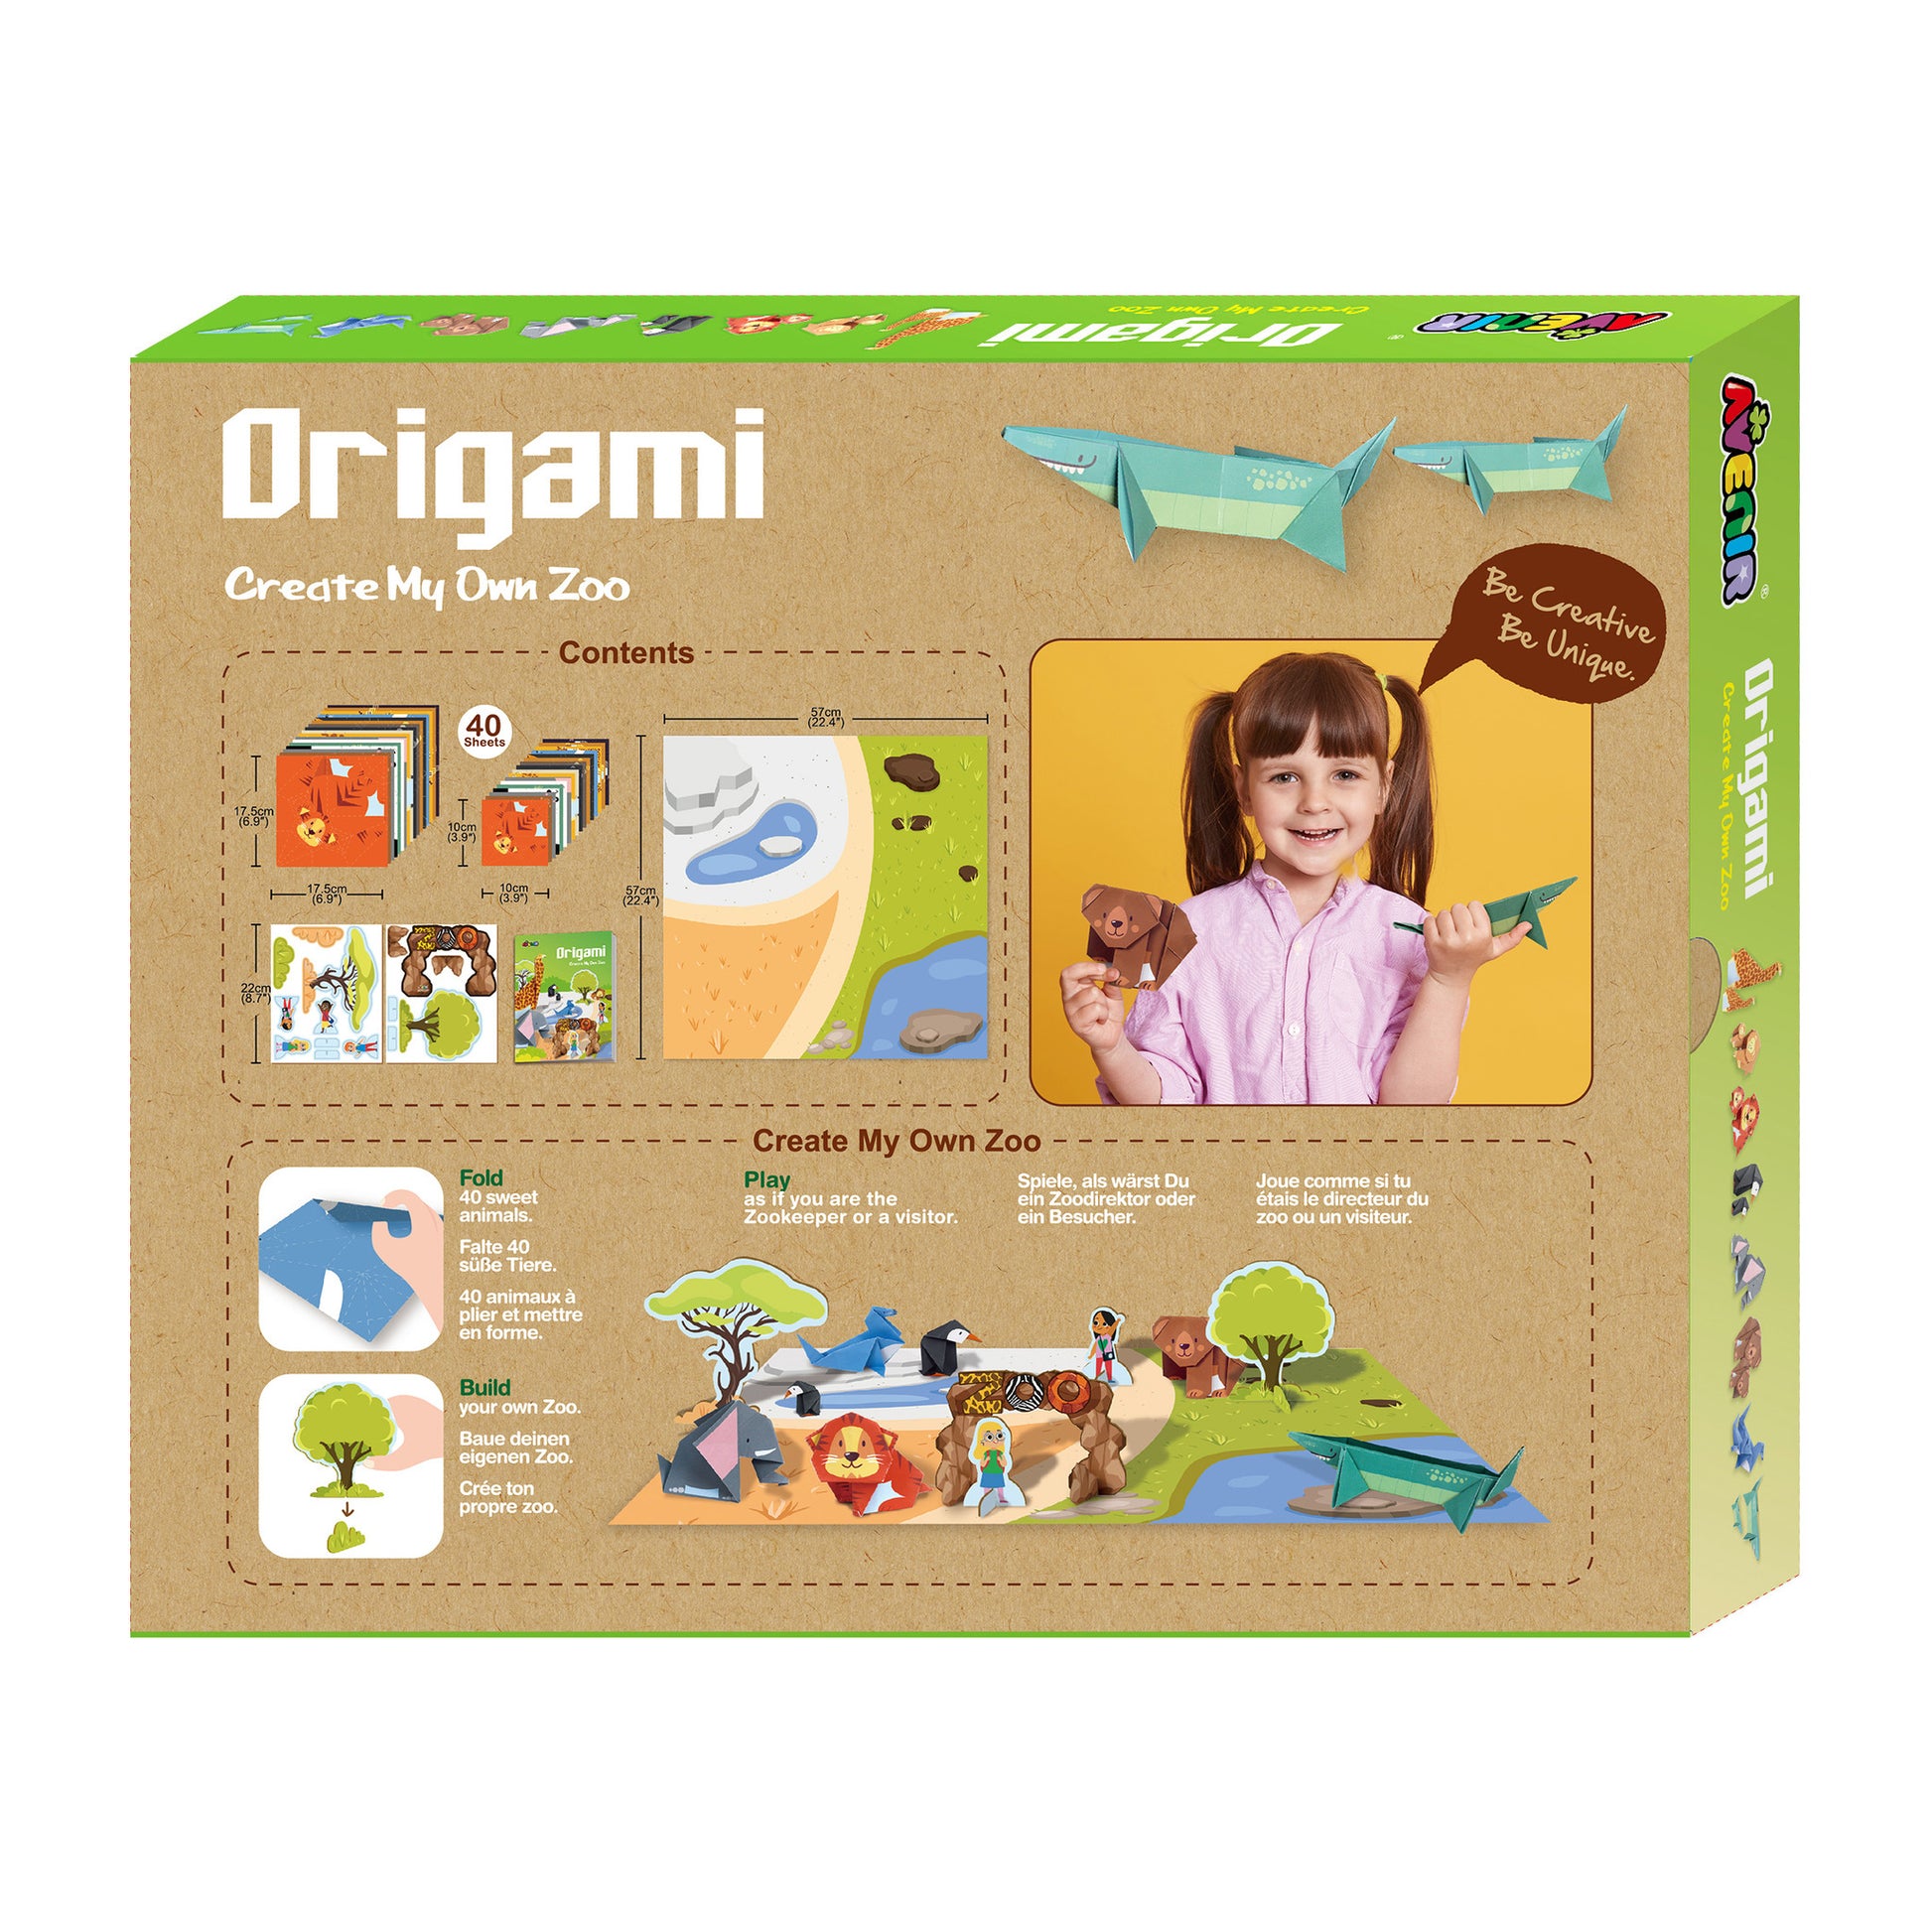 Kids Origami Kit 3D Cartoon Animal Origami Book Double Sided